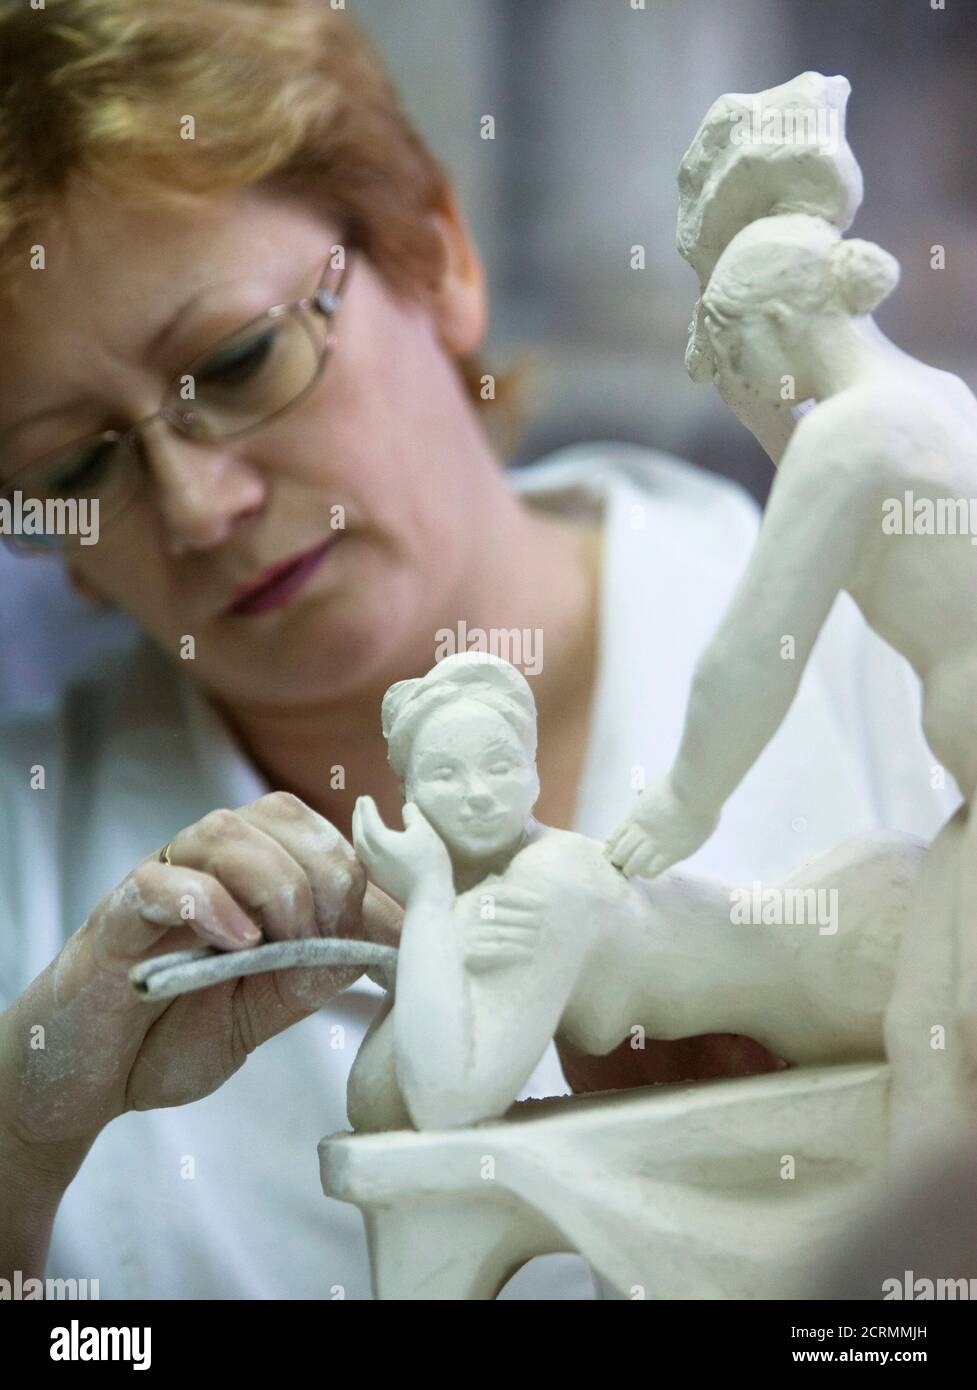 A woman works on a clay figure that is to be used to cast porcelain sculptures in the Dulevo Porcelain factory in the town of Dulevo, about 115 km (73 miles) from Moscow February 20, 2009. A Tsarist-era porcelain factory that survived the Russian revolution and the end of the Soviet Union is on the verge of collapse, its plight typical of hundreds of outmoded industrial plants across this vast country. Founded in 1832, the Dulevo Porcelain pottery once supplied the Russian court. In the 20th century, it produced special communist revolutionary pieces for the Bolshevik elite and their allies ov Stock Photo